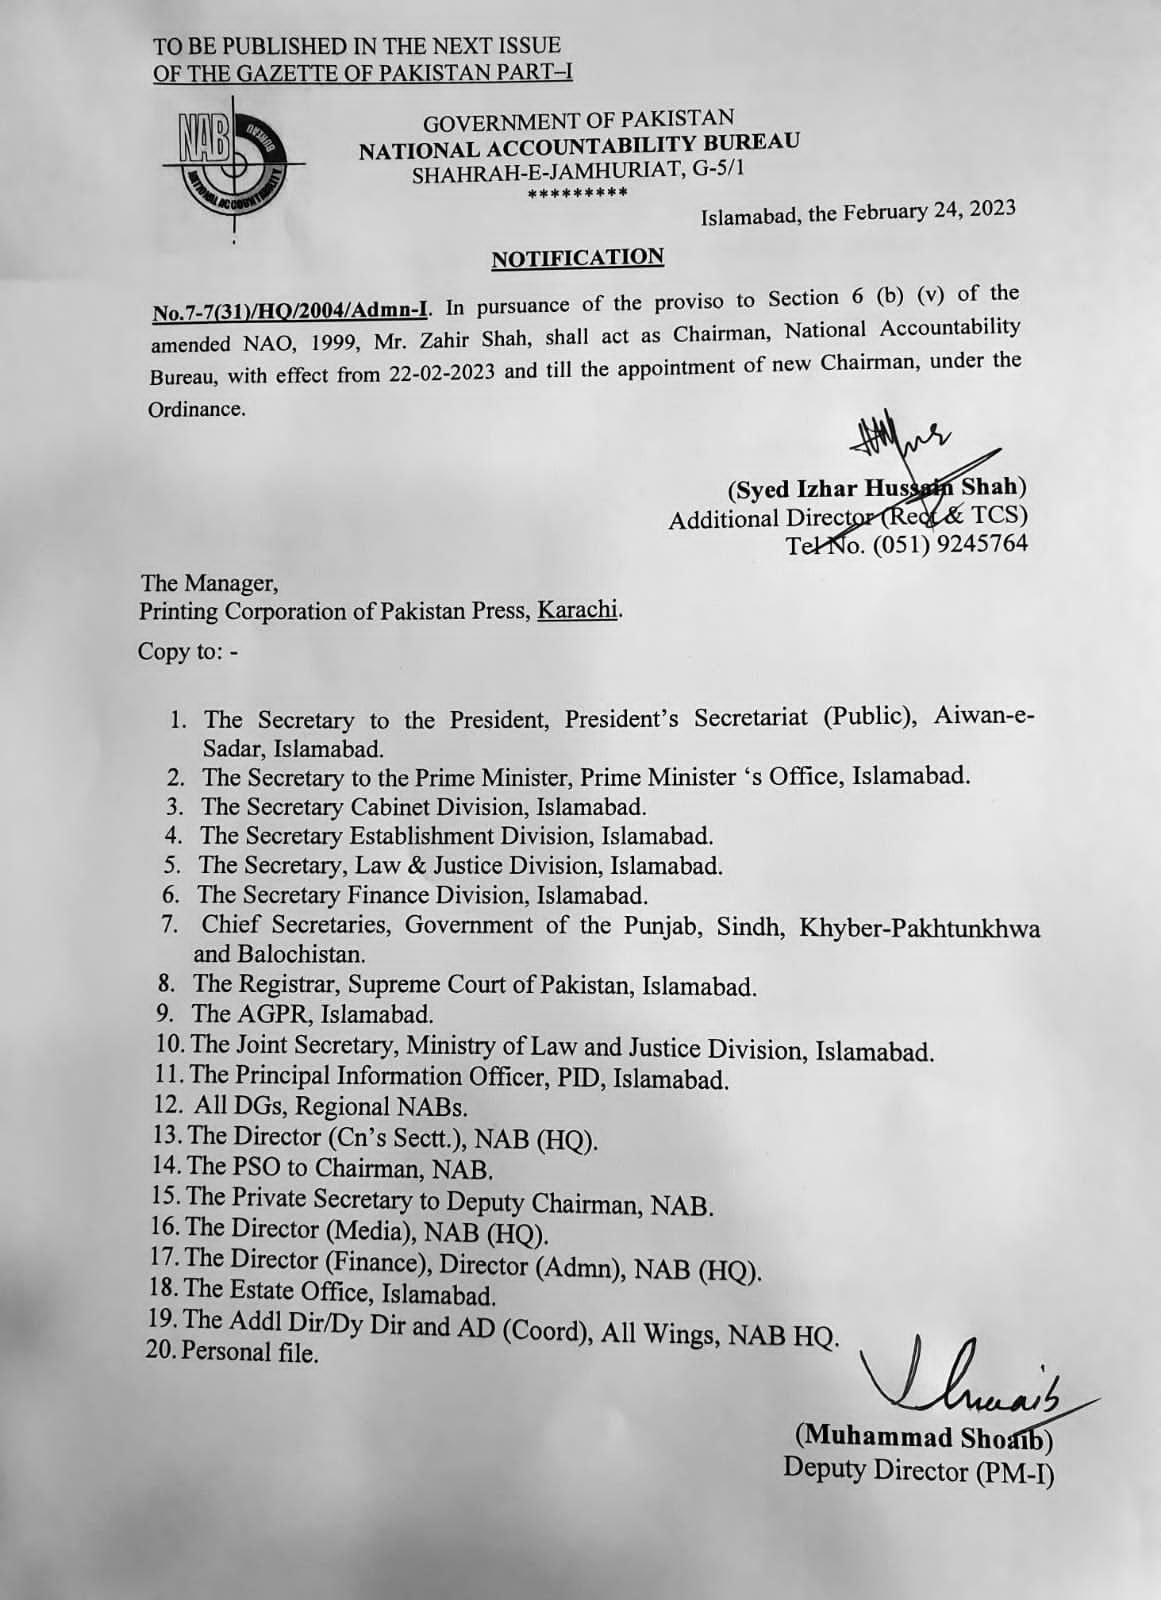 NAB issued notification regarding the appointment of Zahir Shah as acting NAB chief.